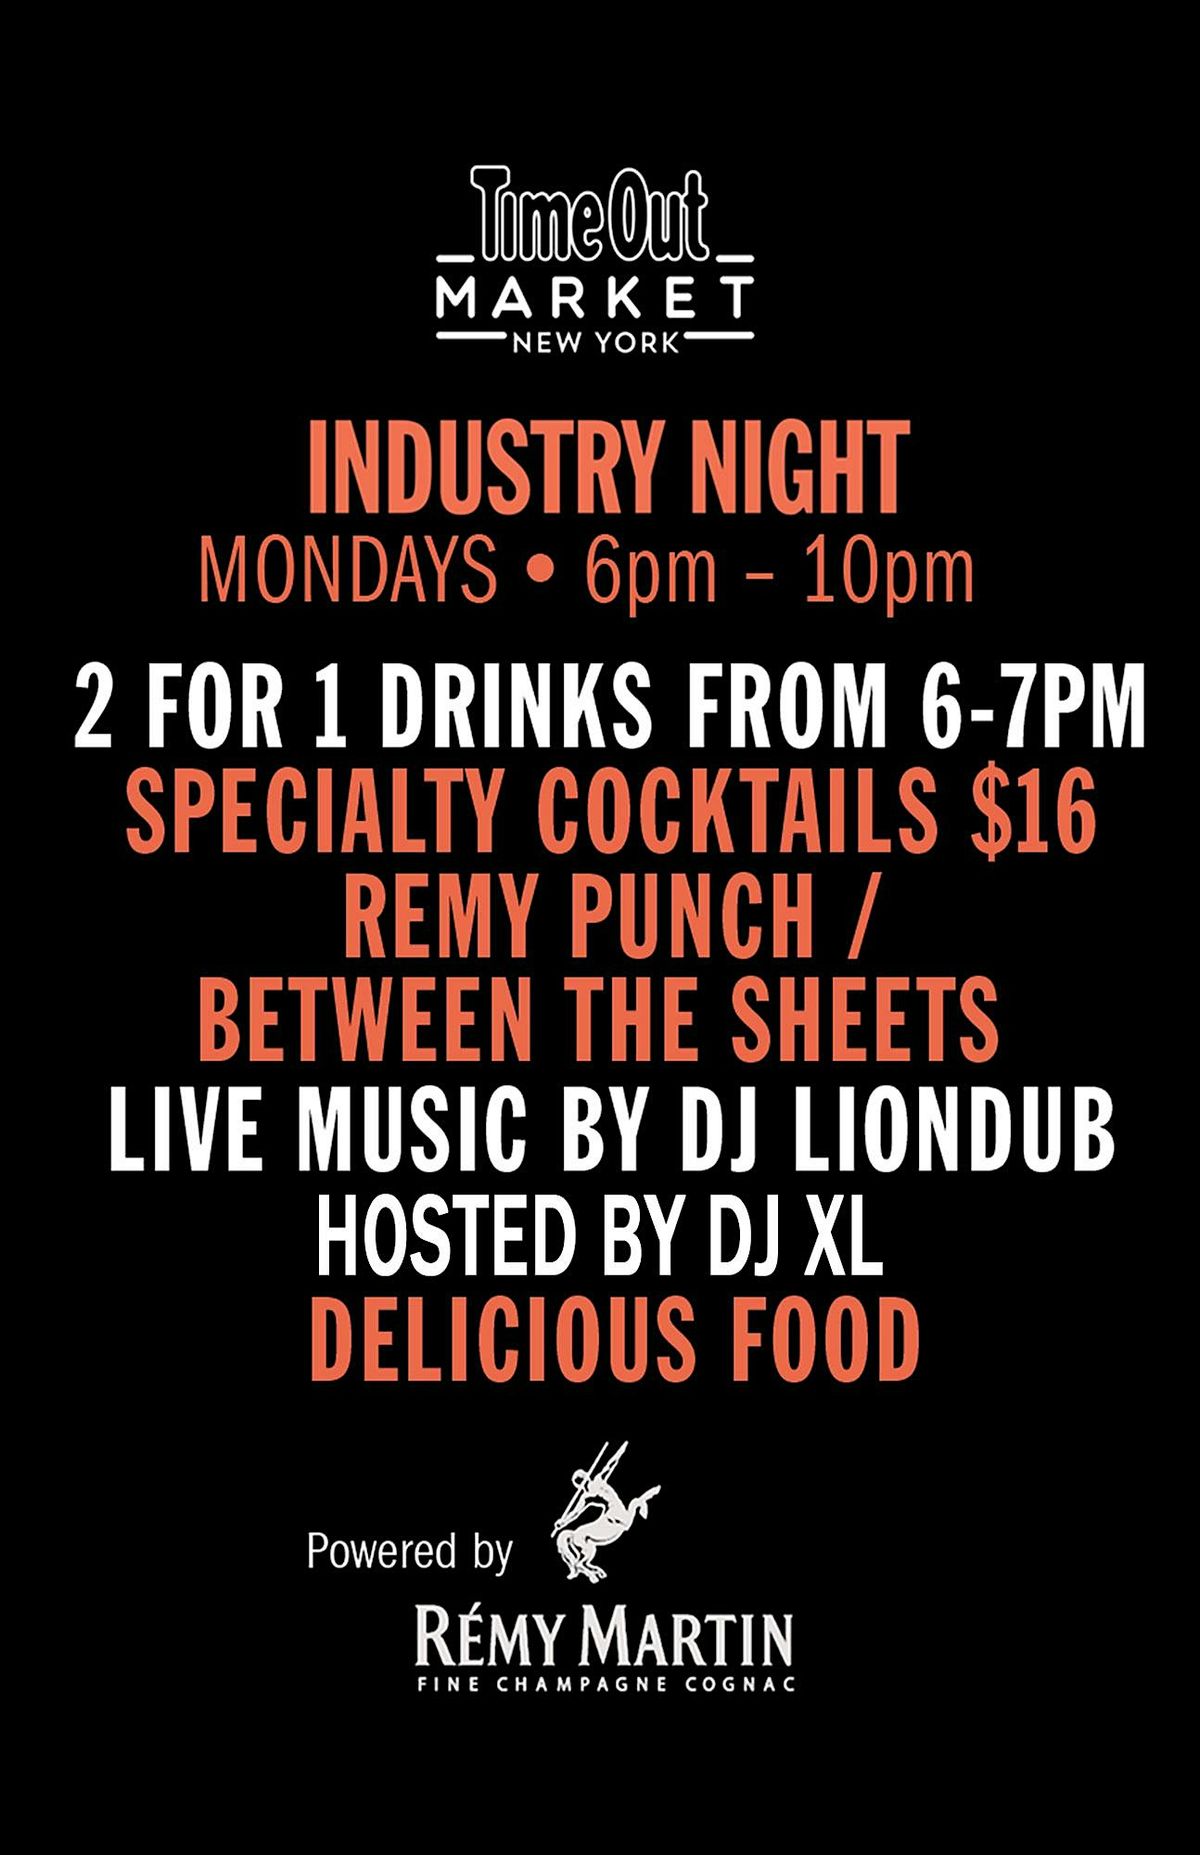 "INDUSTRY MONDAY'S" @ TIMEOUT MARKET NEW YORK